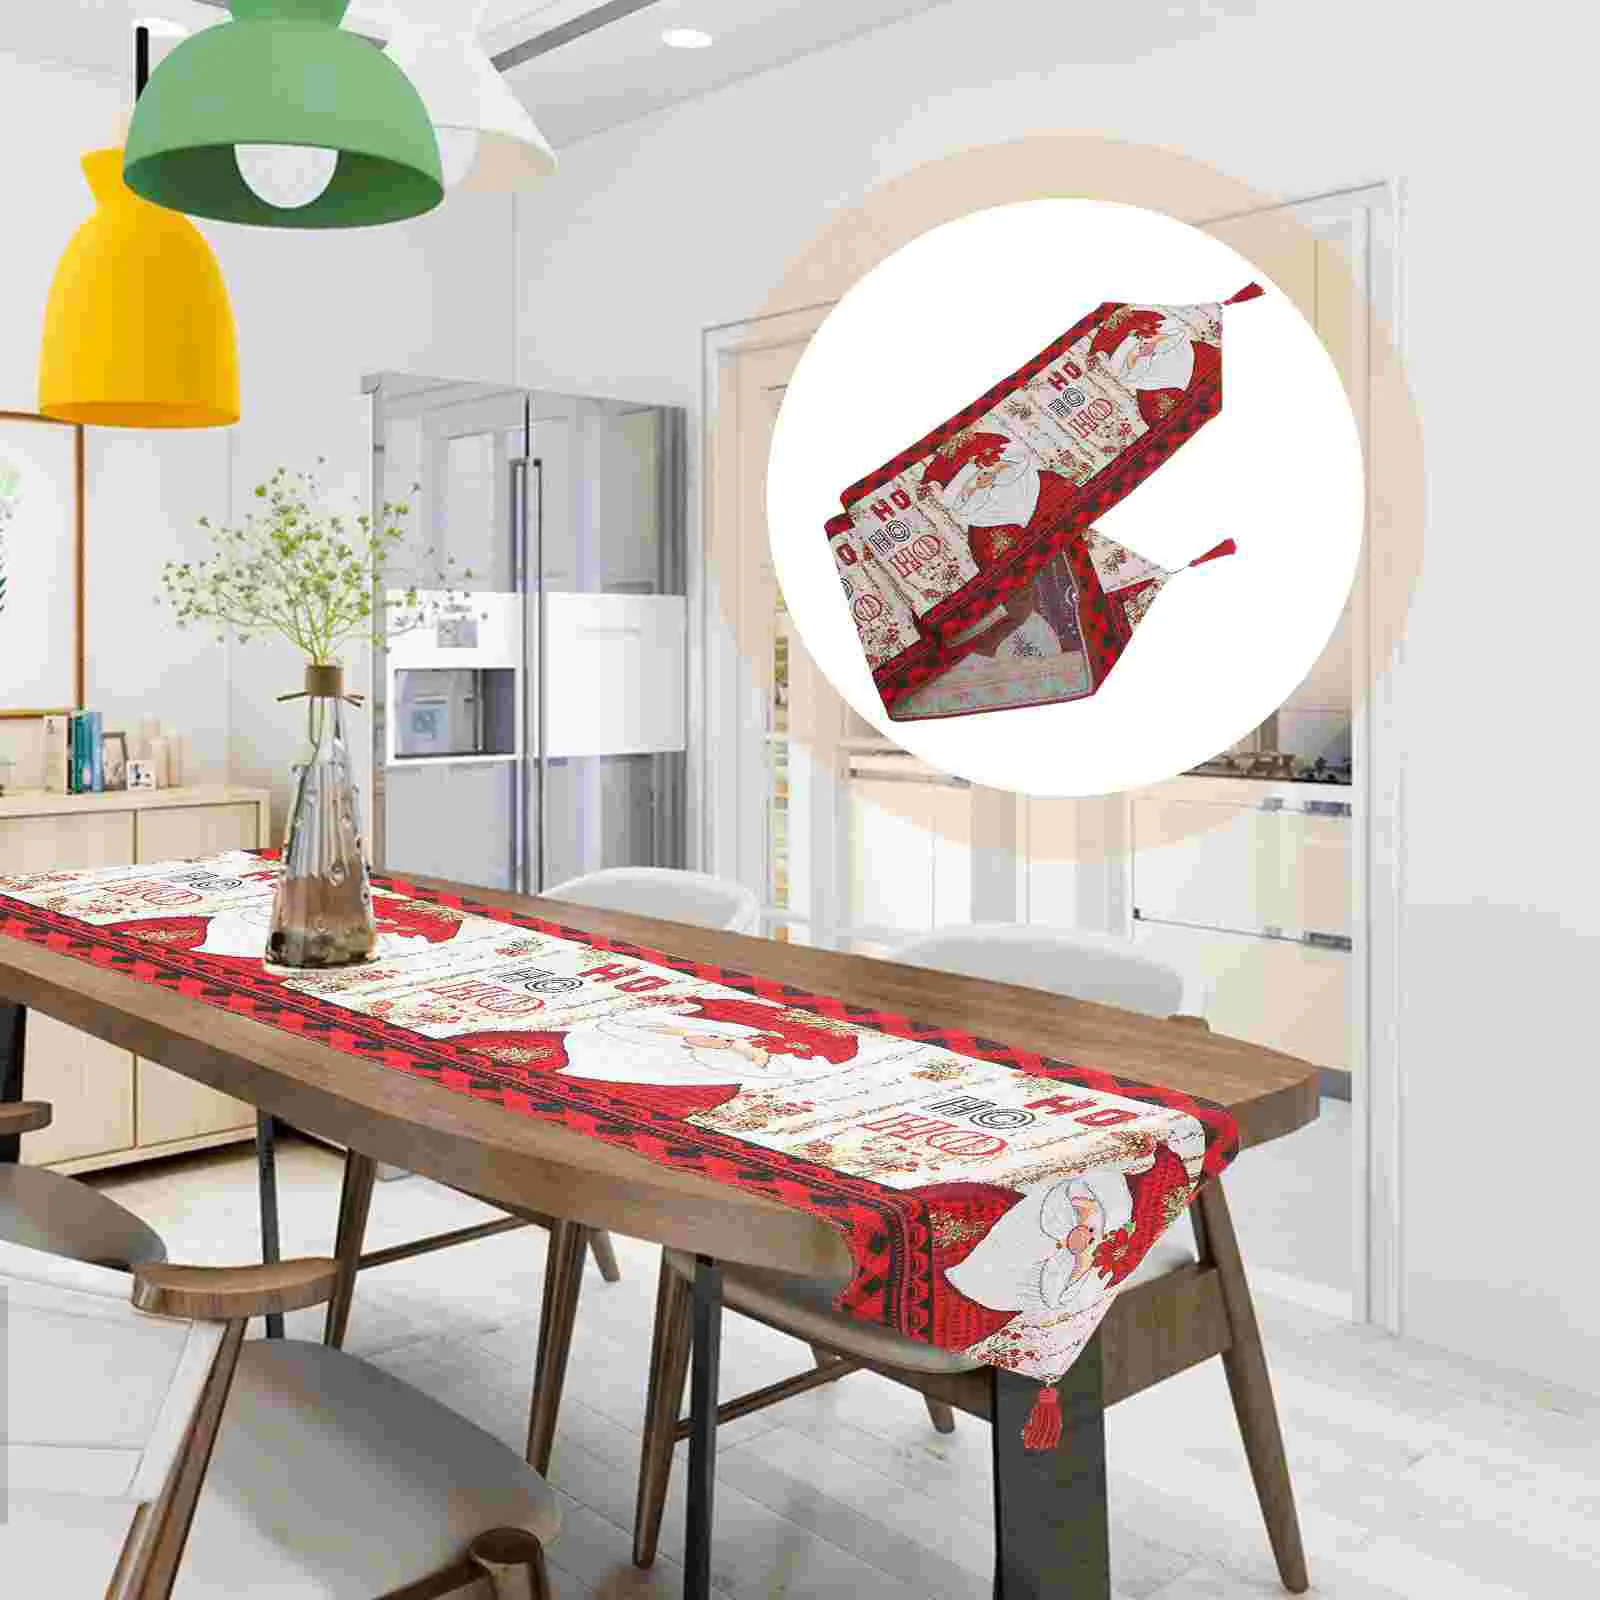 

Christmas Table Runner Tablecloth Oilcloth Decorations Decorative Festival Runners Polyester Covers Banquet Bathroom